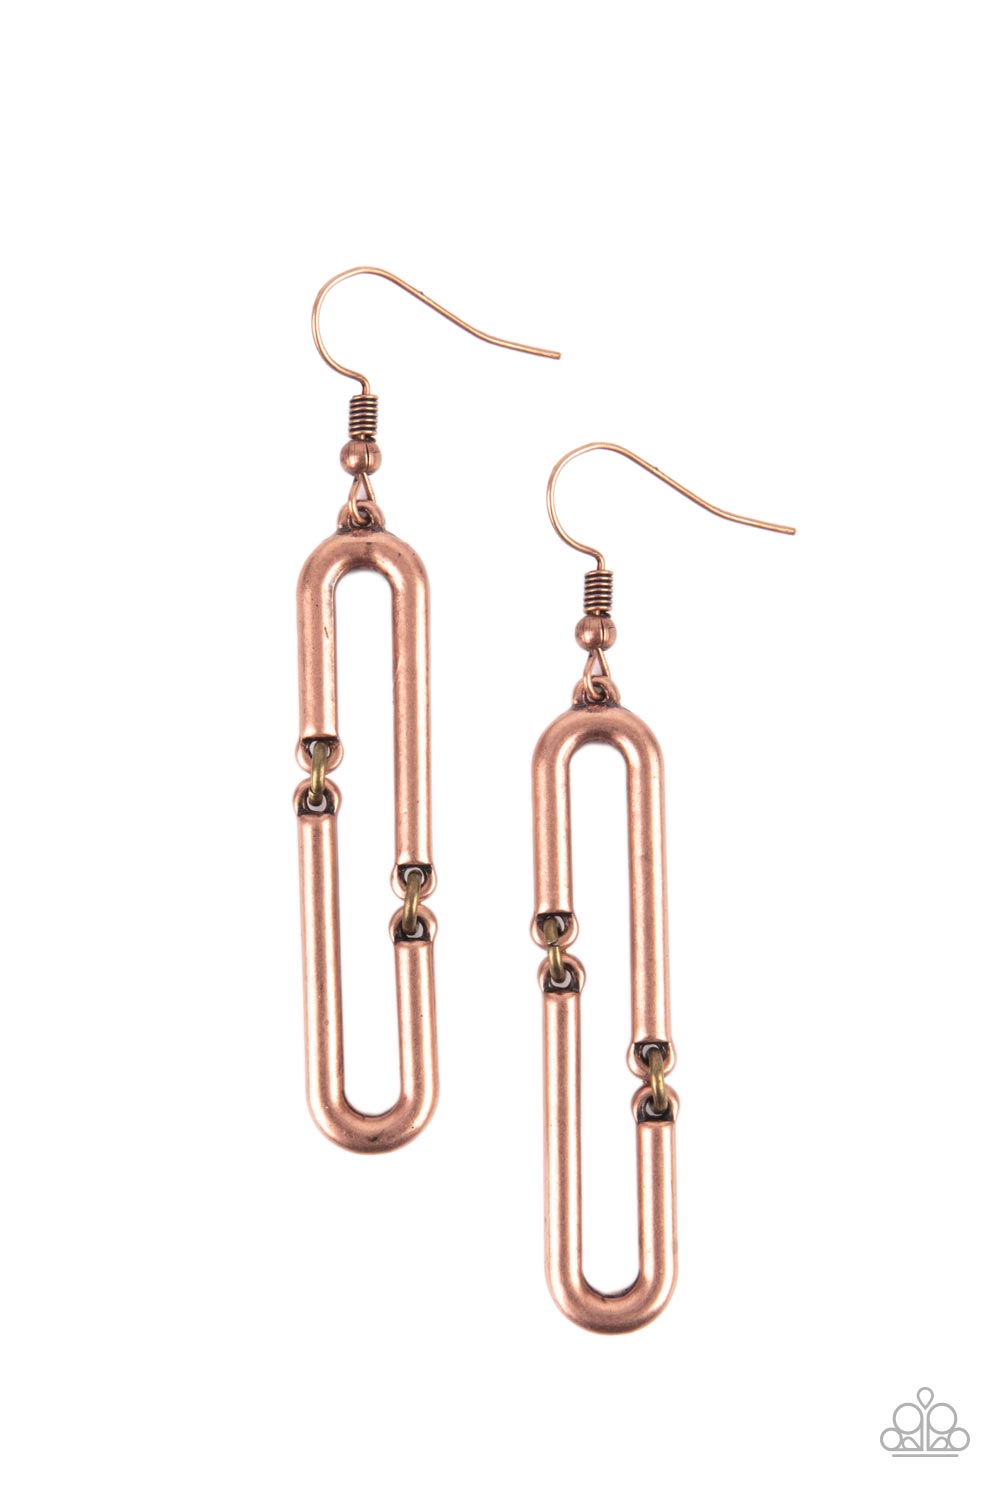 Linked and Synced - Copper - Paparazzi - Davetta Jewels